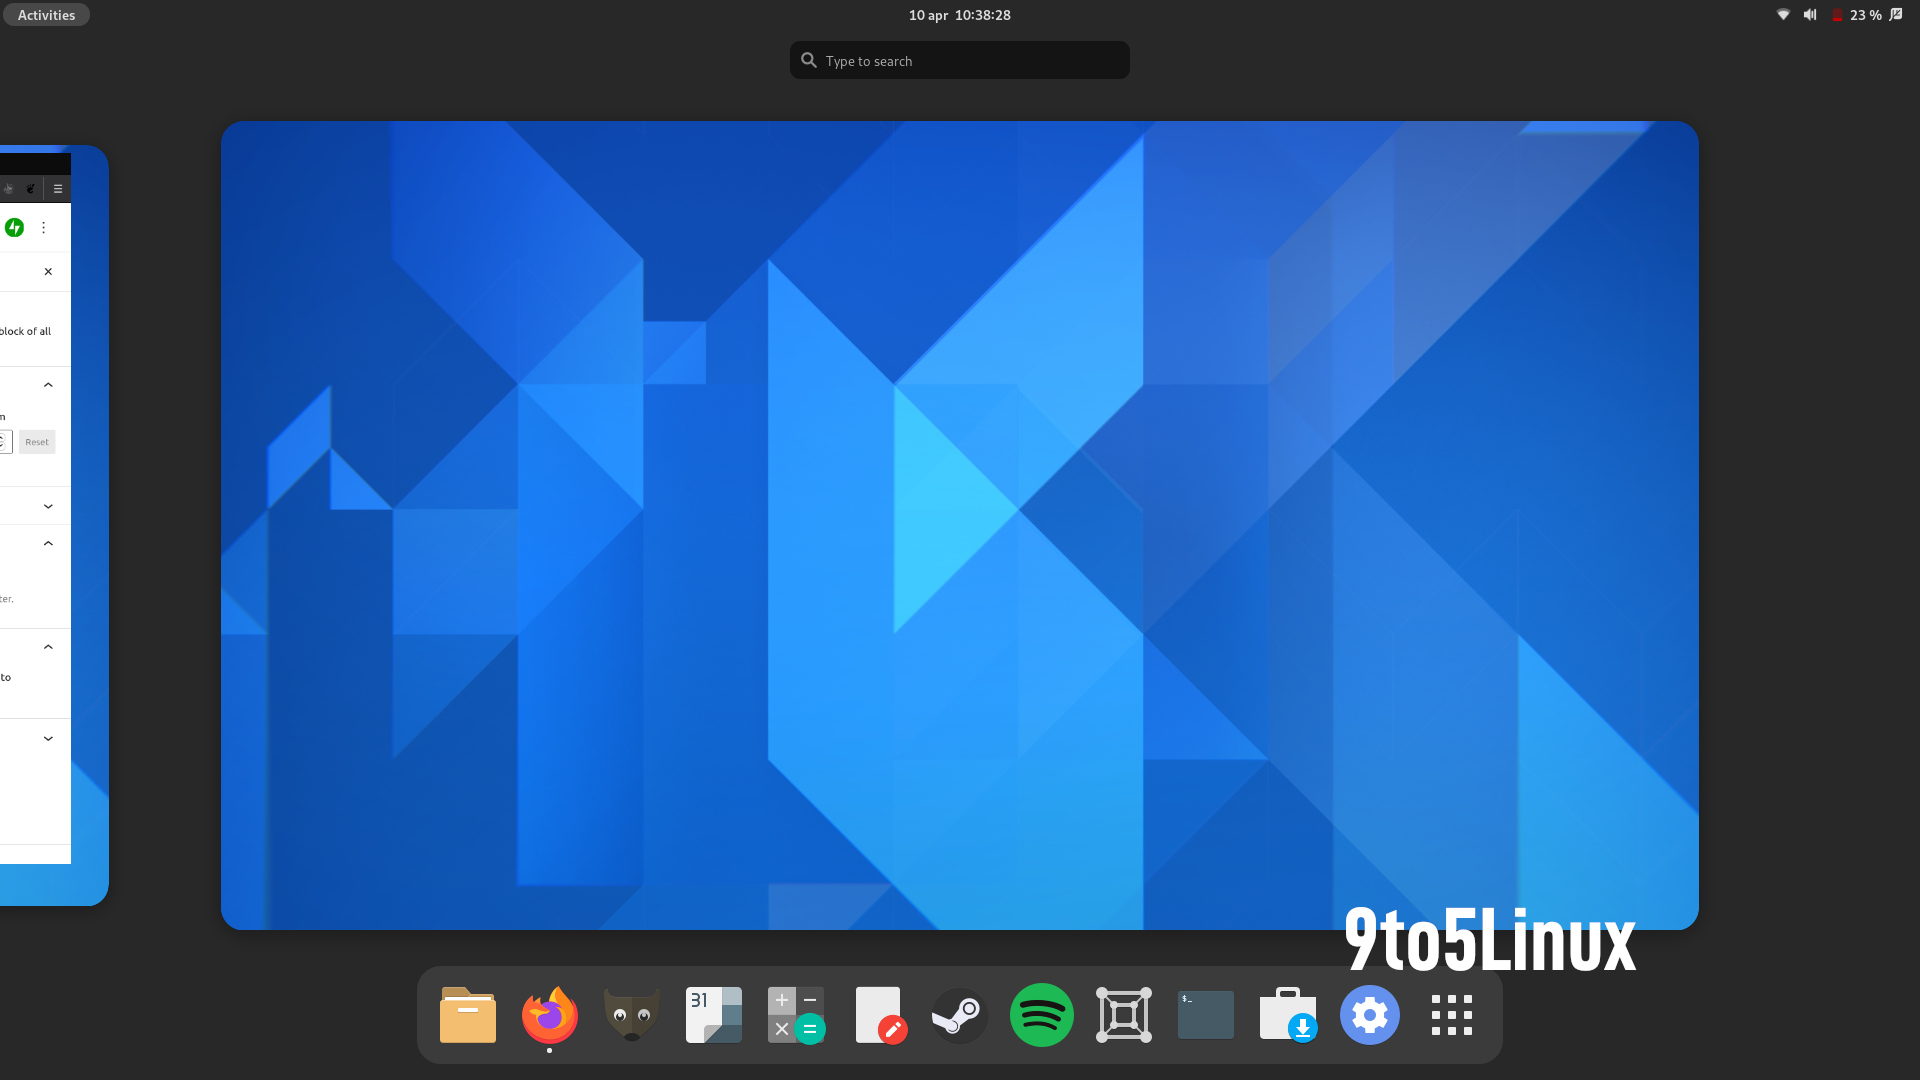 GNOME 41 Desktop Environment Enters Beta Testing with New Apps, Better Wayland Support